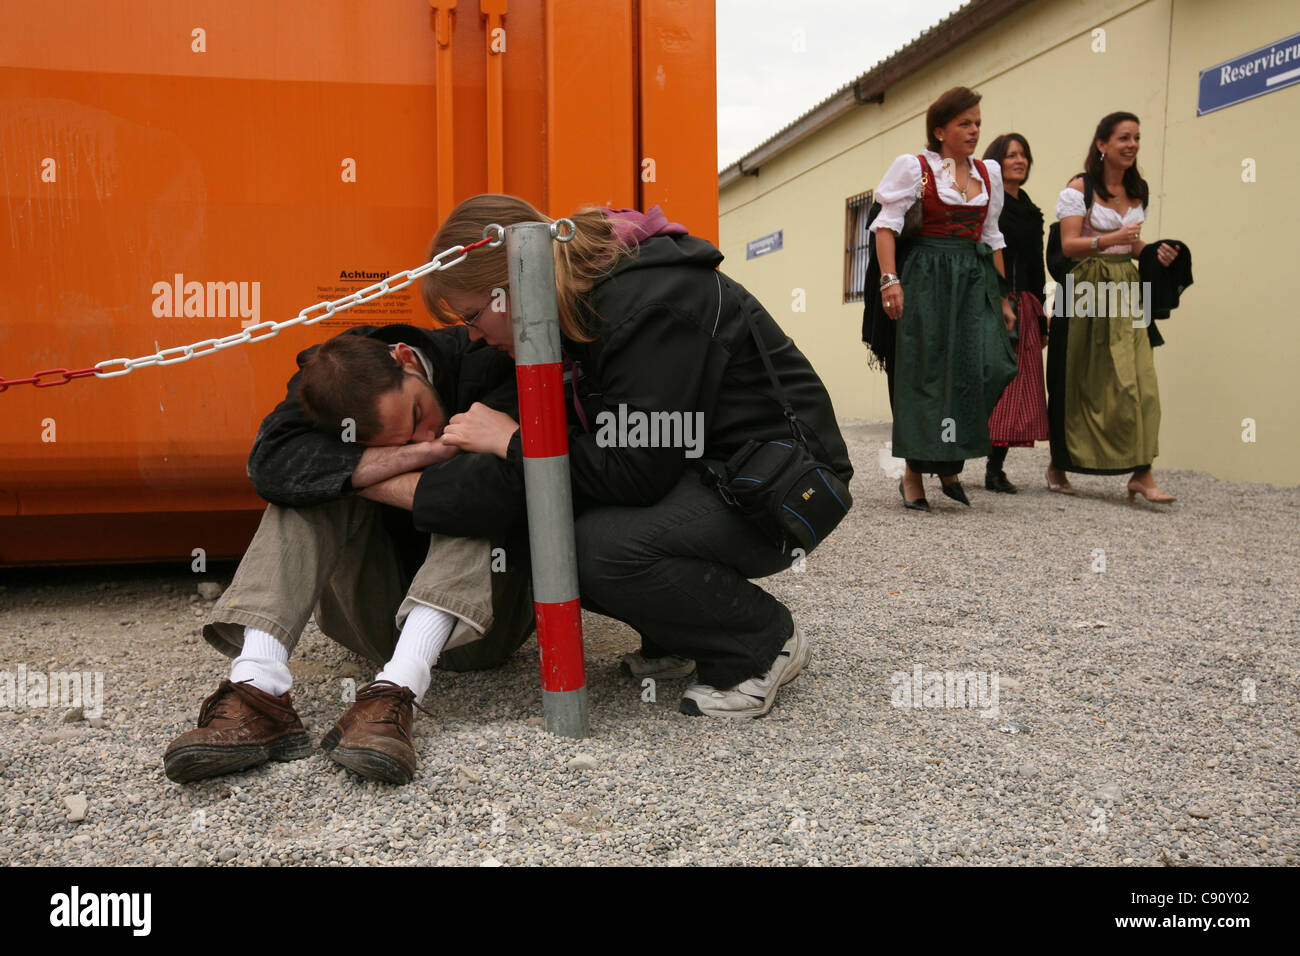 Over drunken visitor at the Oktoberfest Beer Festival in Munich, Germany. Stock Photo